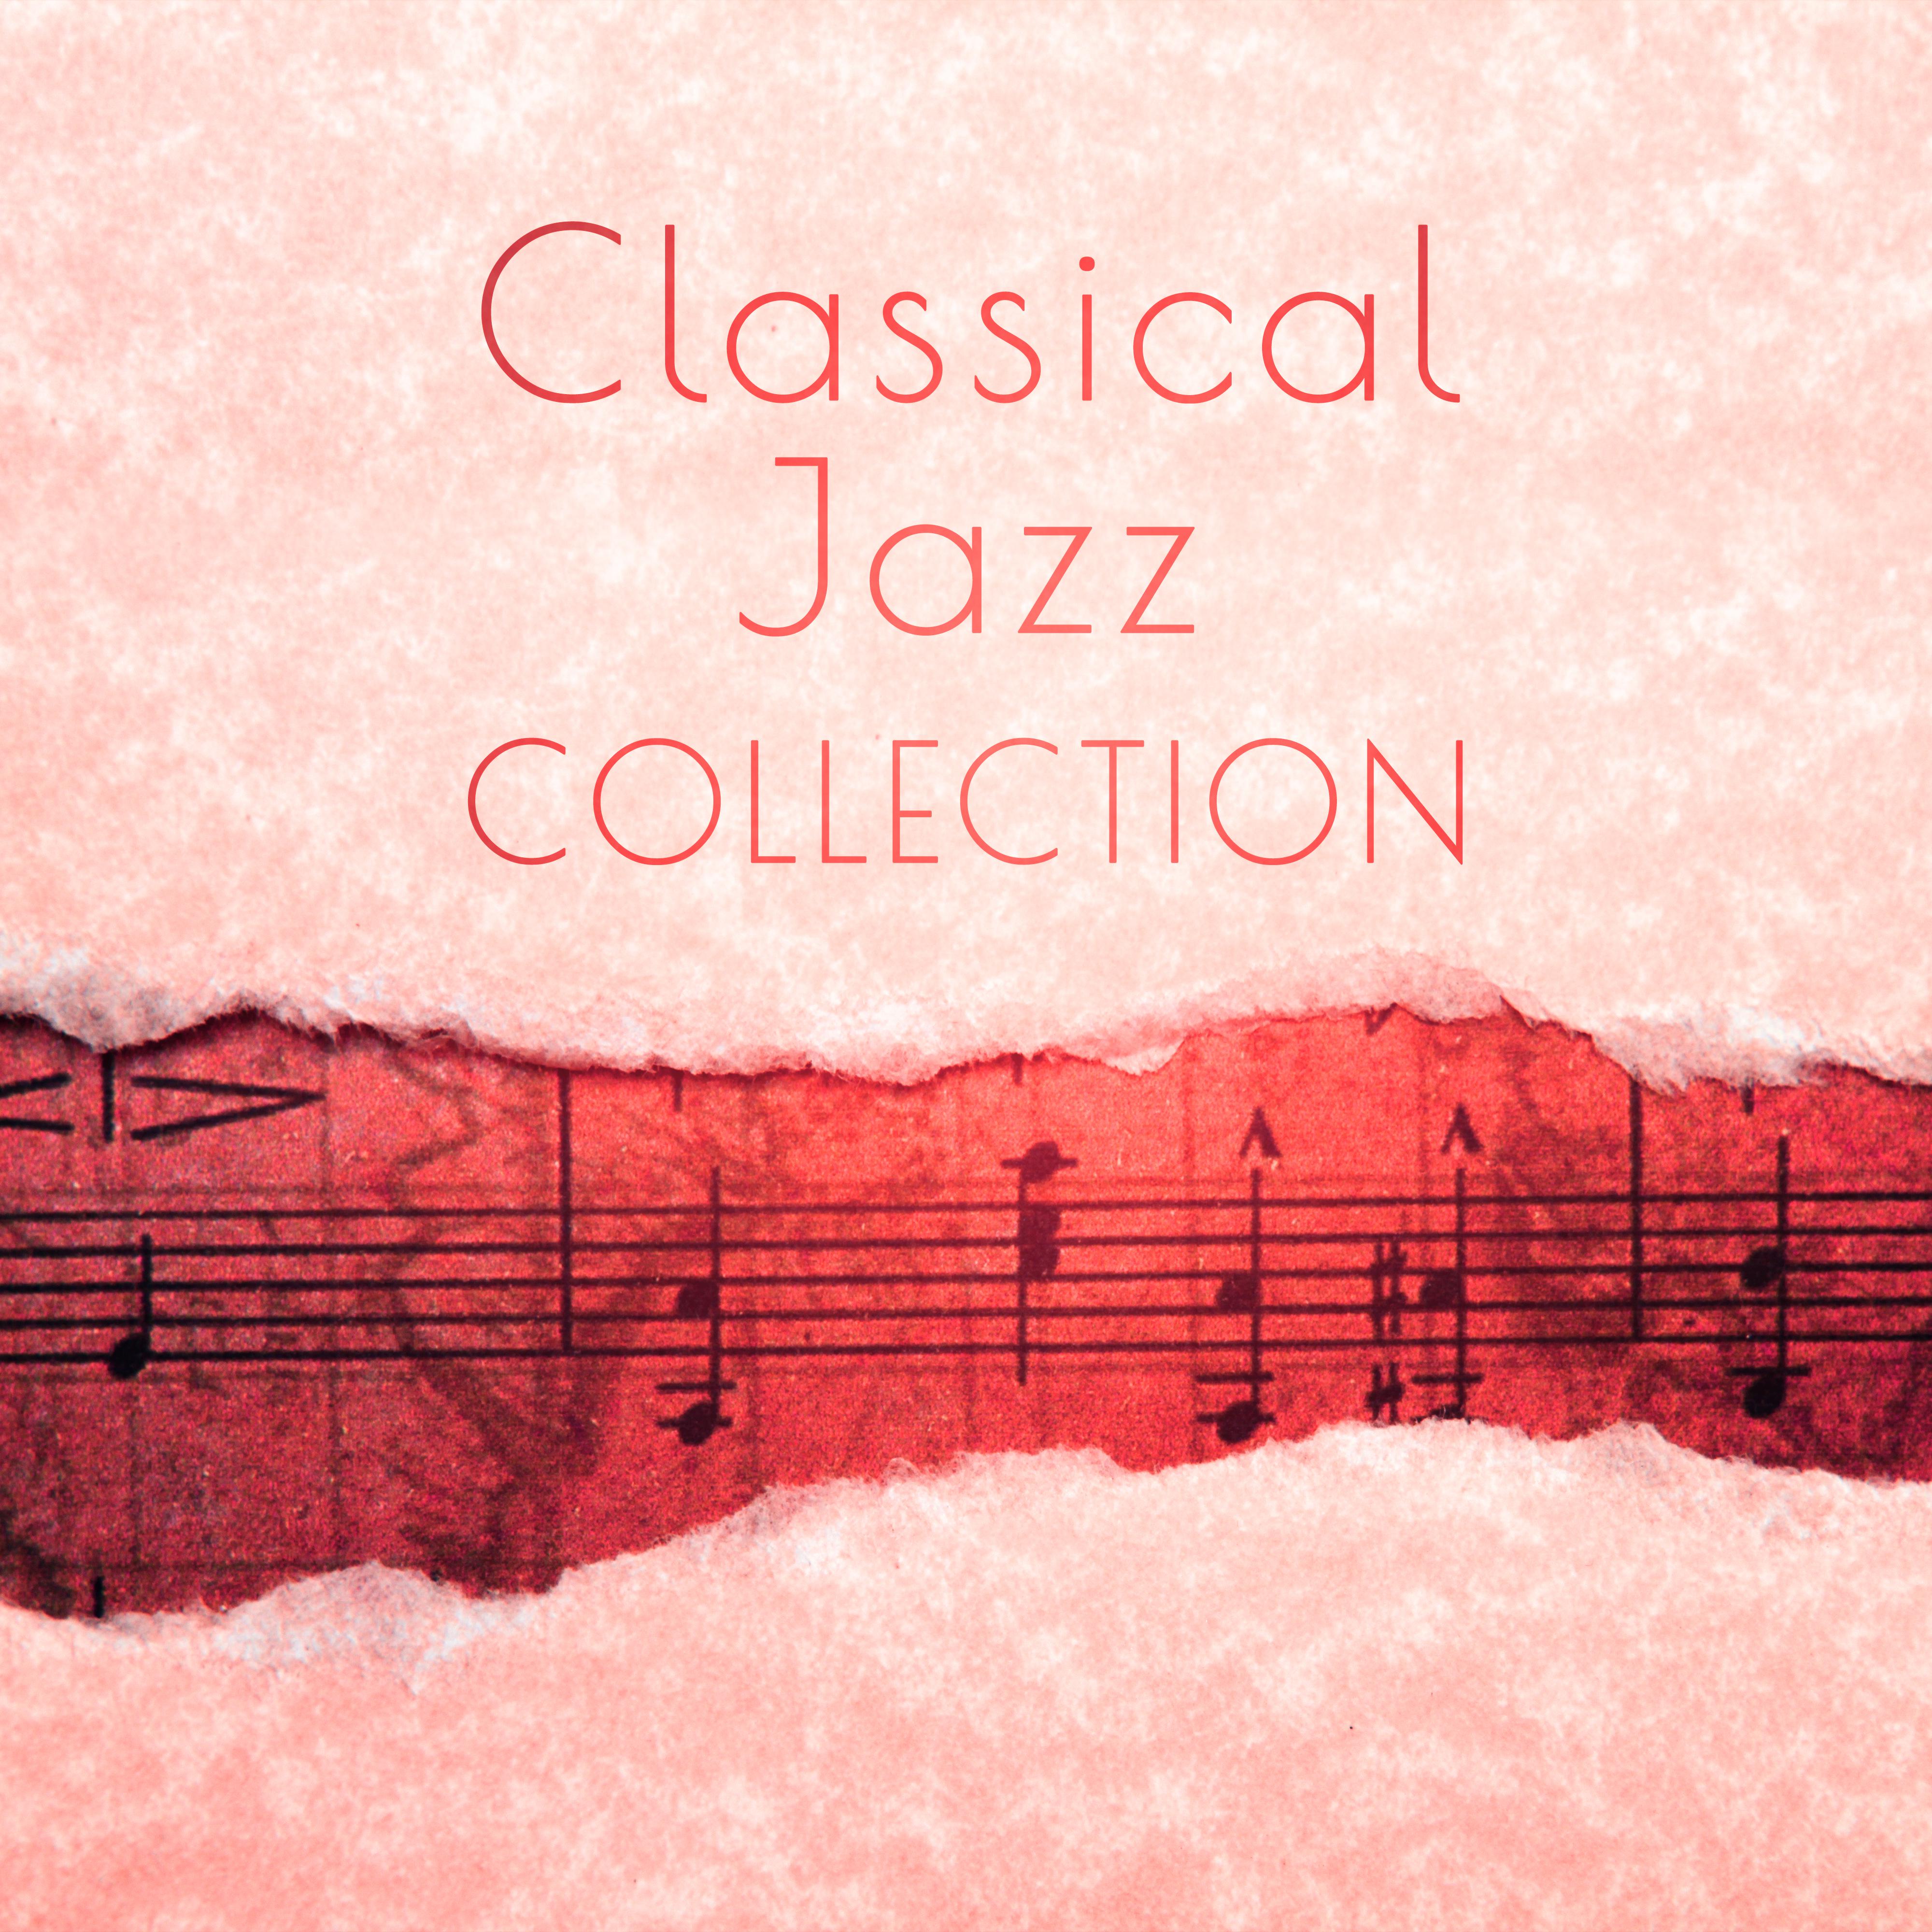 Classical Jazz Collection  Smooth Jazz, Instrumental Piano for Jazz Bar, Gentle Jazz Music, Classical Jazz Piano